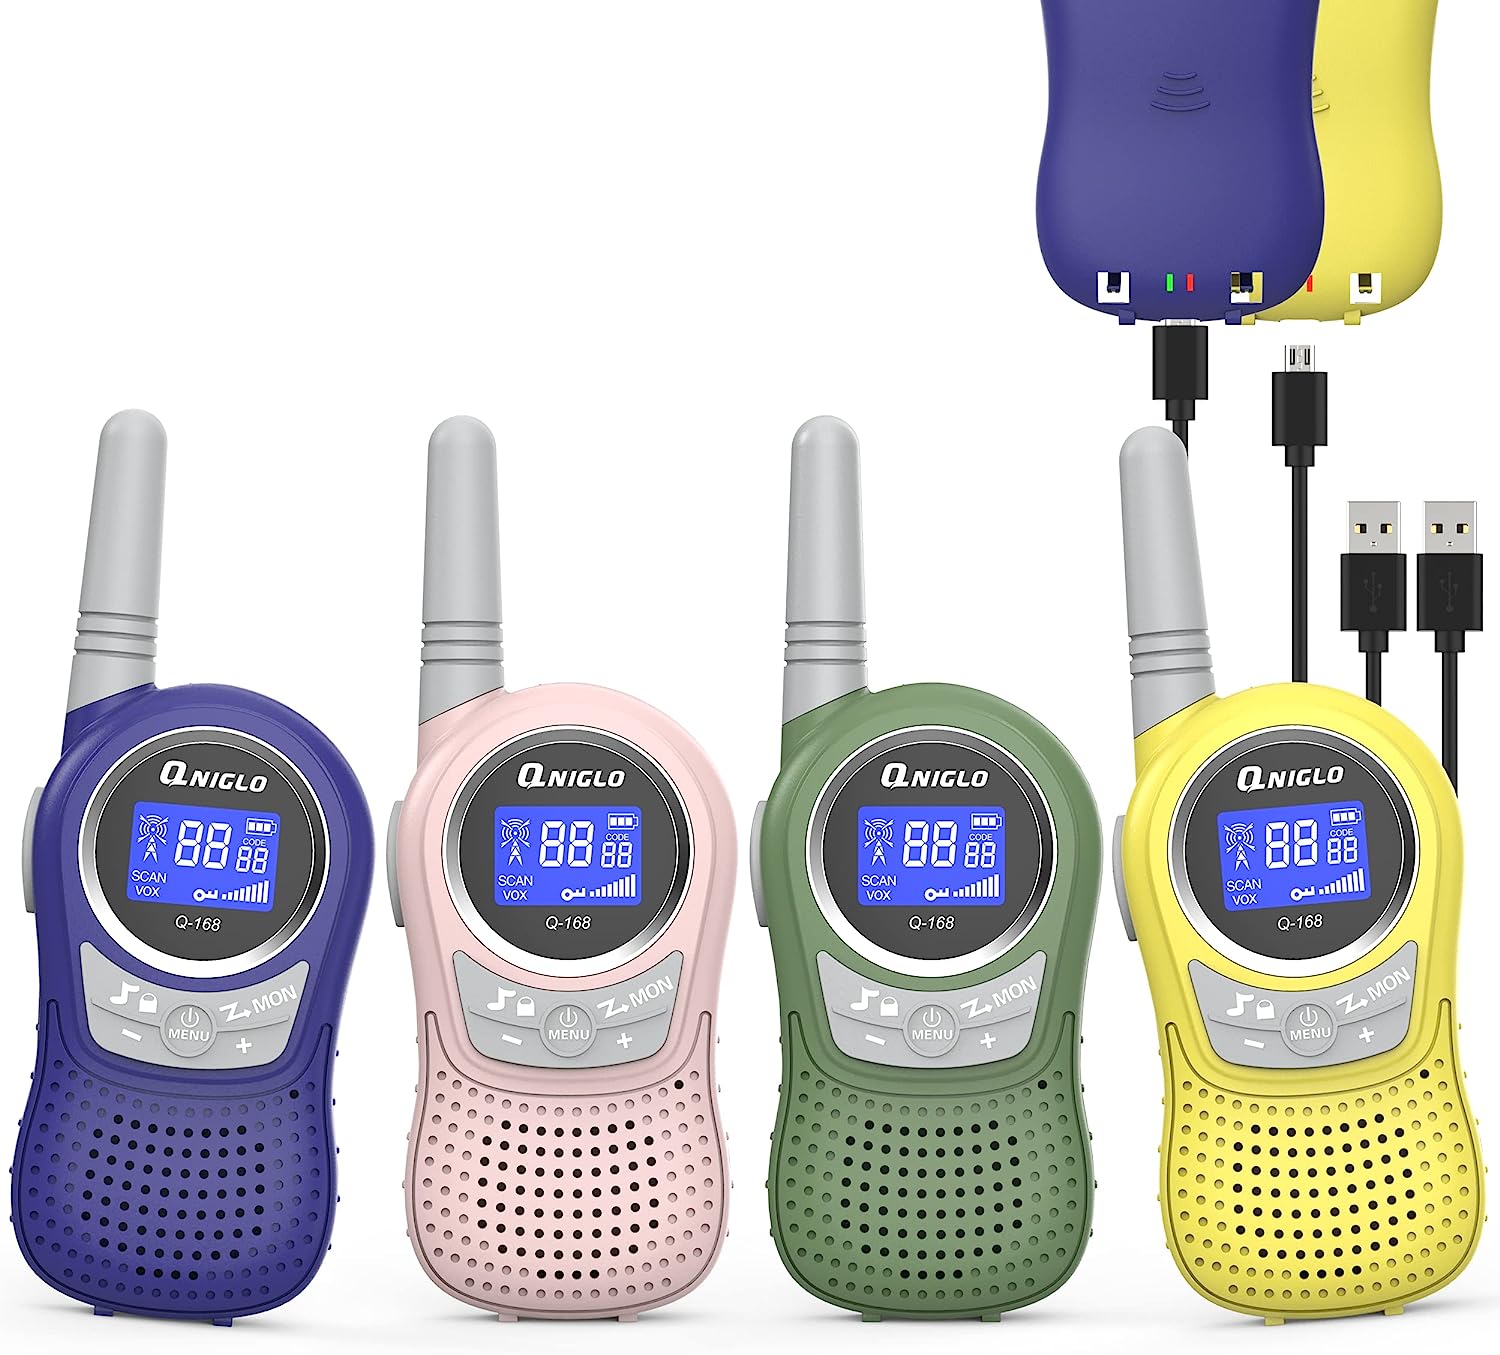 Qniglo Rechargeable Walkie Talkies for Adults, Kids [...]